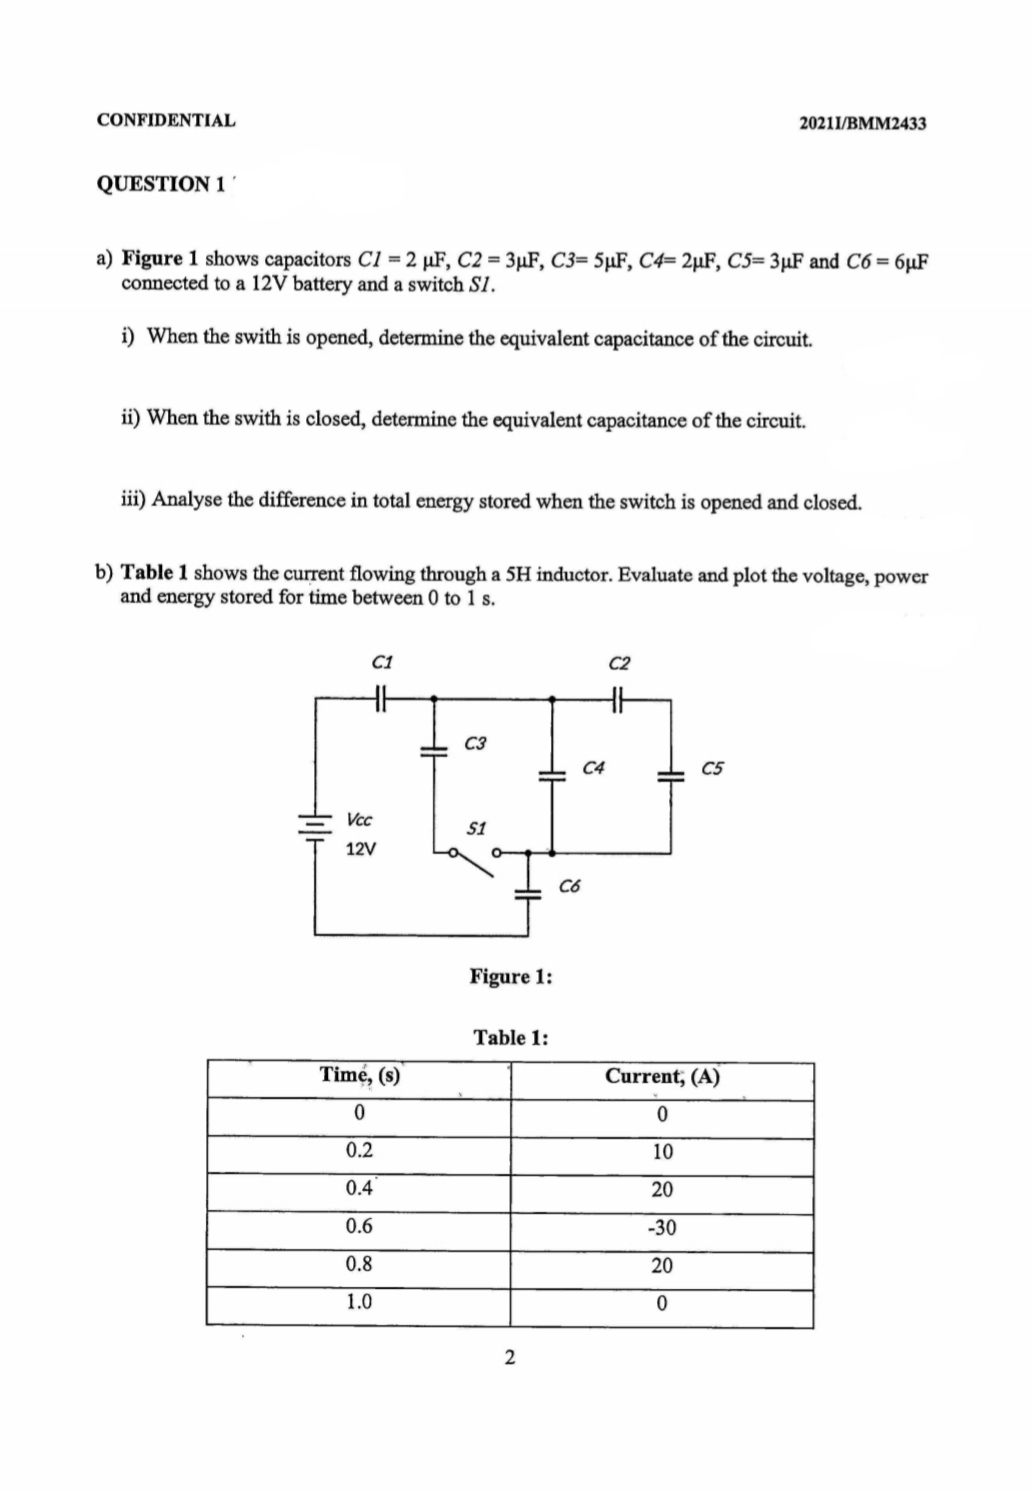 CONFIDENTIAL
20211/BMM2433
QUESTION 1
a) Figure 1 shows capacitors C1 = 2 µF, C2 = 3µF, C3= 5µF, C4= 2µF, C5= 3µF and C6 = 6µF
connected to a 12V battery and a switch S1.
i) When the swith is opened, determine the equivalent capacitance of the circuit.
ii) When the swith is closed, determine the equivalent capacitance of the circuit.
iii) Analyse the difference in total energy stored when the switch is opened and closed.
b) Table 1 shows the current flowing through a 5H inductor. Evaluate and plot the voltage, power
and energy stored for time between 0 to 1 s.
C1
C2
C3
C4
C5
Vcc
12V
Có
Figure 1:
Table 1:
Time, (s)
Current, (A)
0.2
10
0.4
20
0.6
-30
0.8
20
1.0
HH
